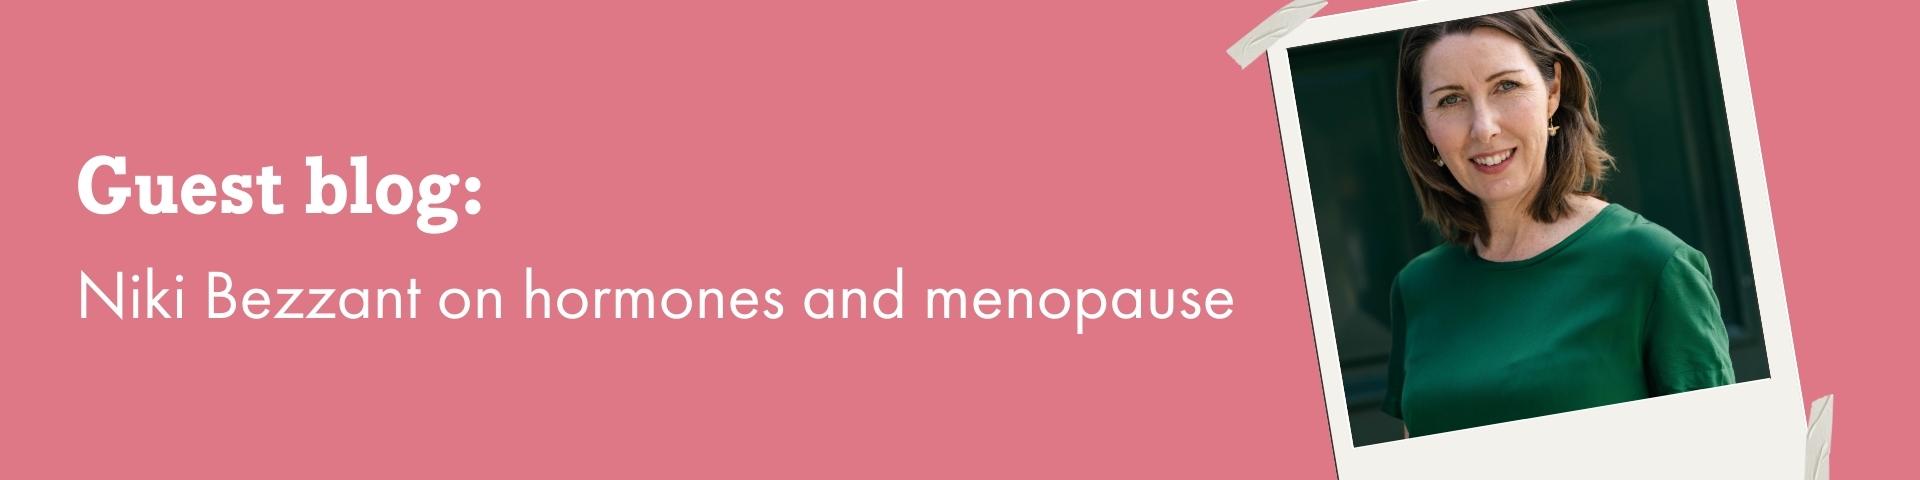 Guest blog: Niki Bezzant on hormones and menopause